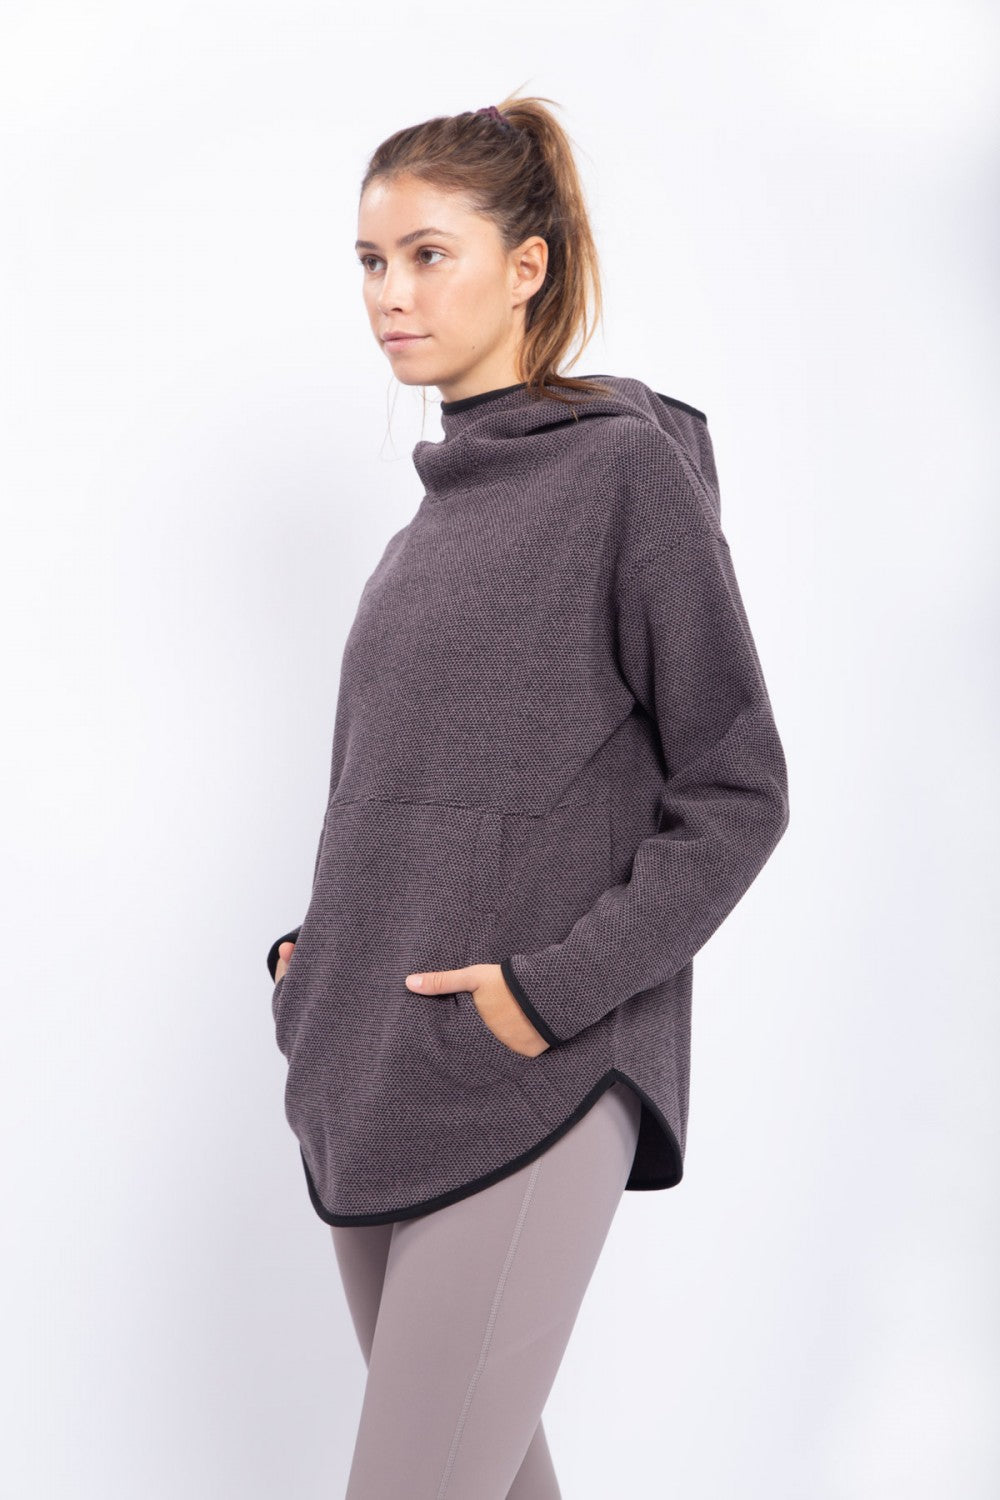 High Neck Swoop Pullover With Hood